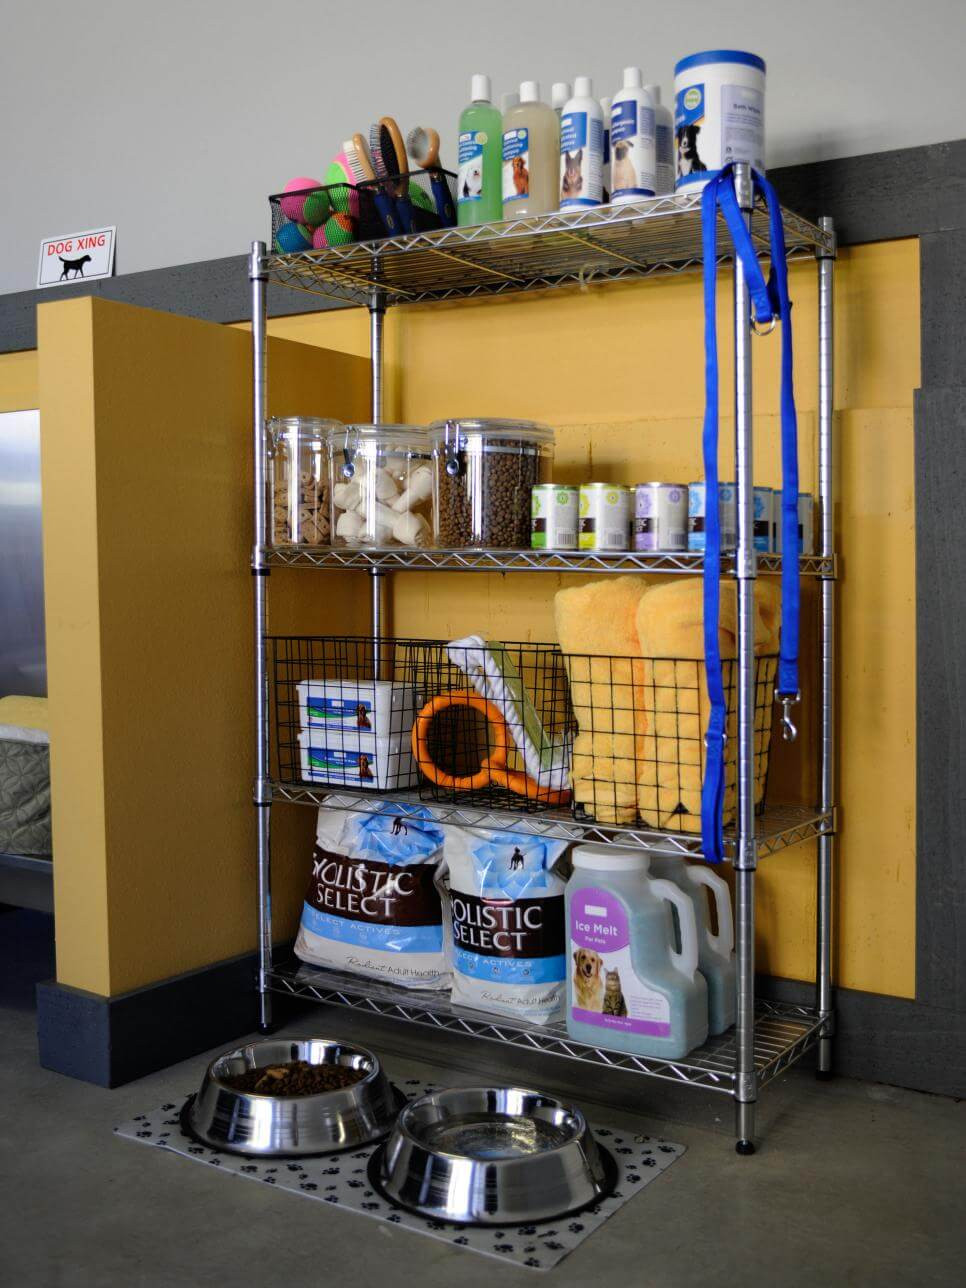 Garage Organization Tips
 Garage Organization Tips to Make Yours be Useful